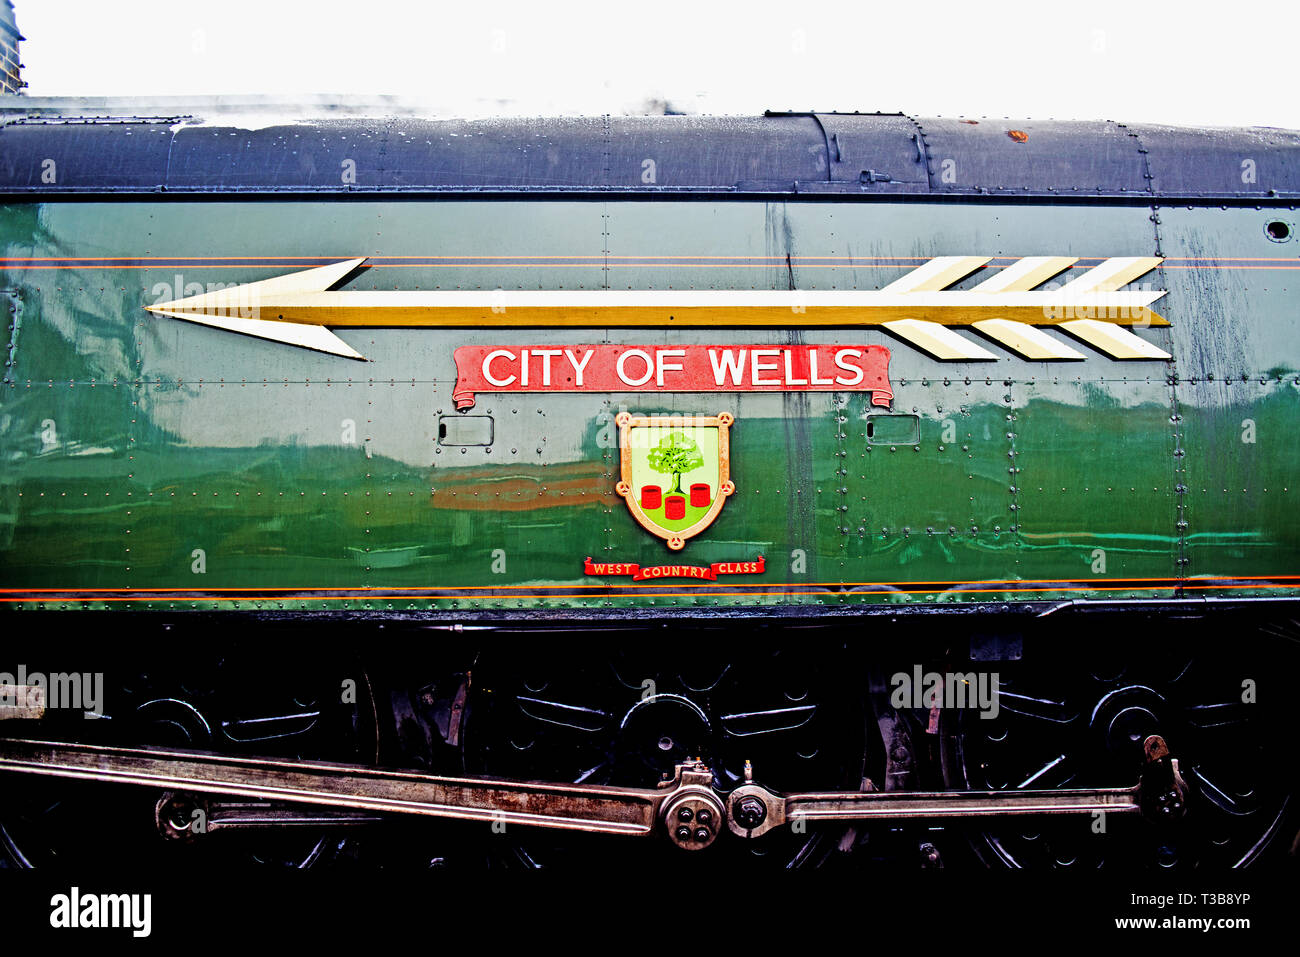 Bullied Pacific, West Country Class No 34092 City of Wells , nameplate detail, at Grosmont, North Yorkshire Moors Railway, England, 2nd April 2019 Stock Photo